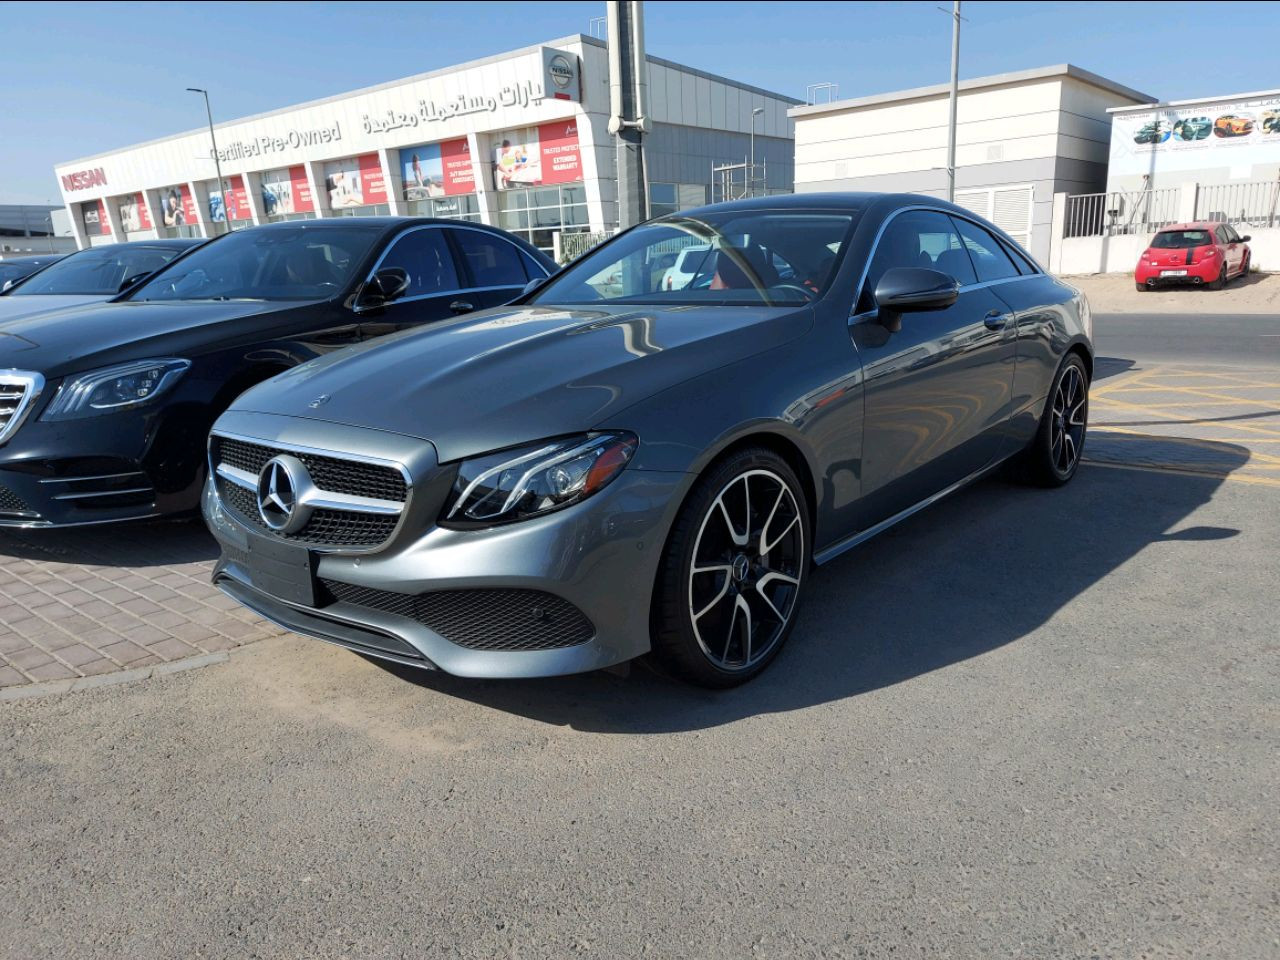 Mercedes Benz 400/420 2018 AED 175,000, Good condition, Full Option, US Spec, Negotiable